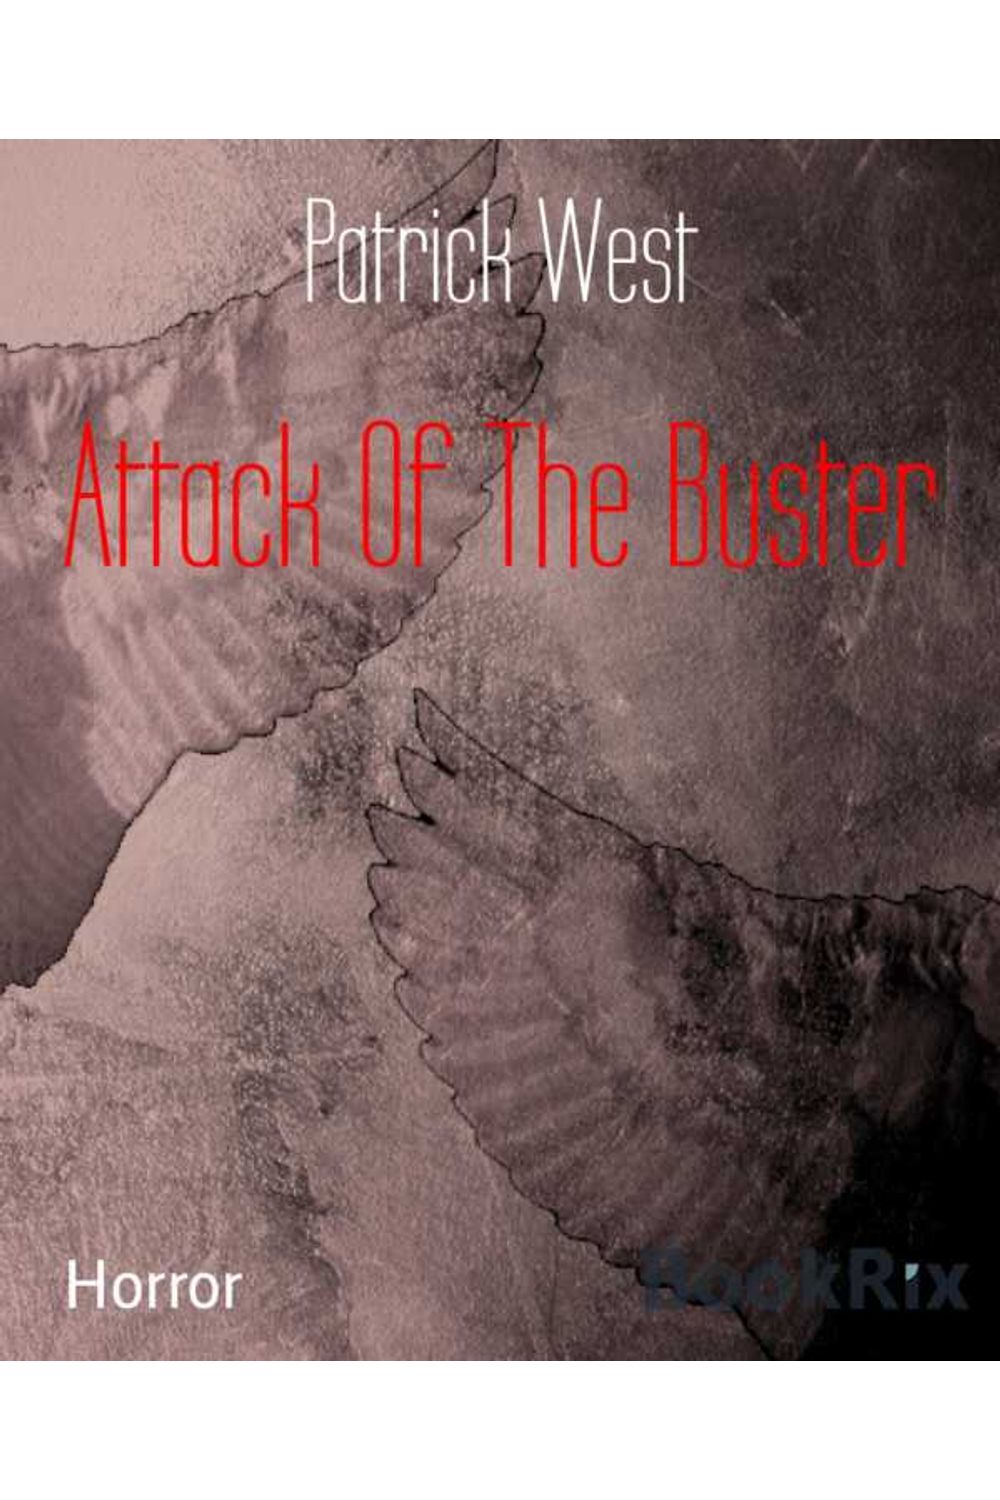 bw-attack-of-the-buster-bookrix-9783748796626